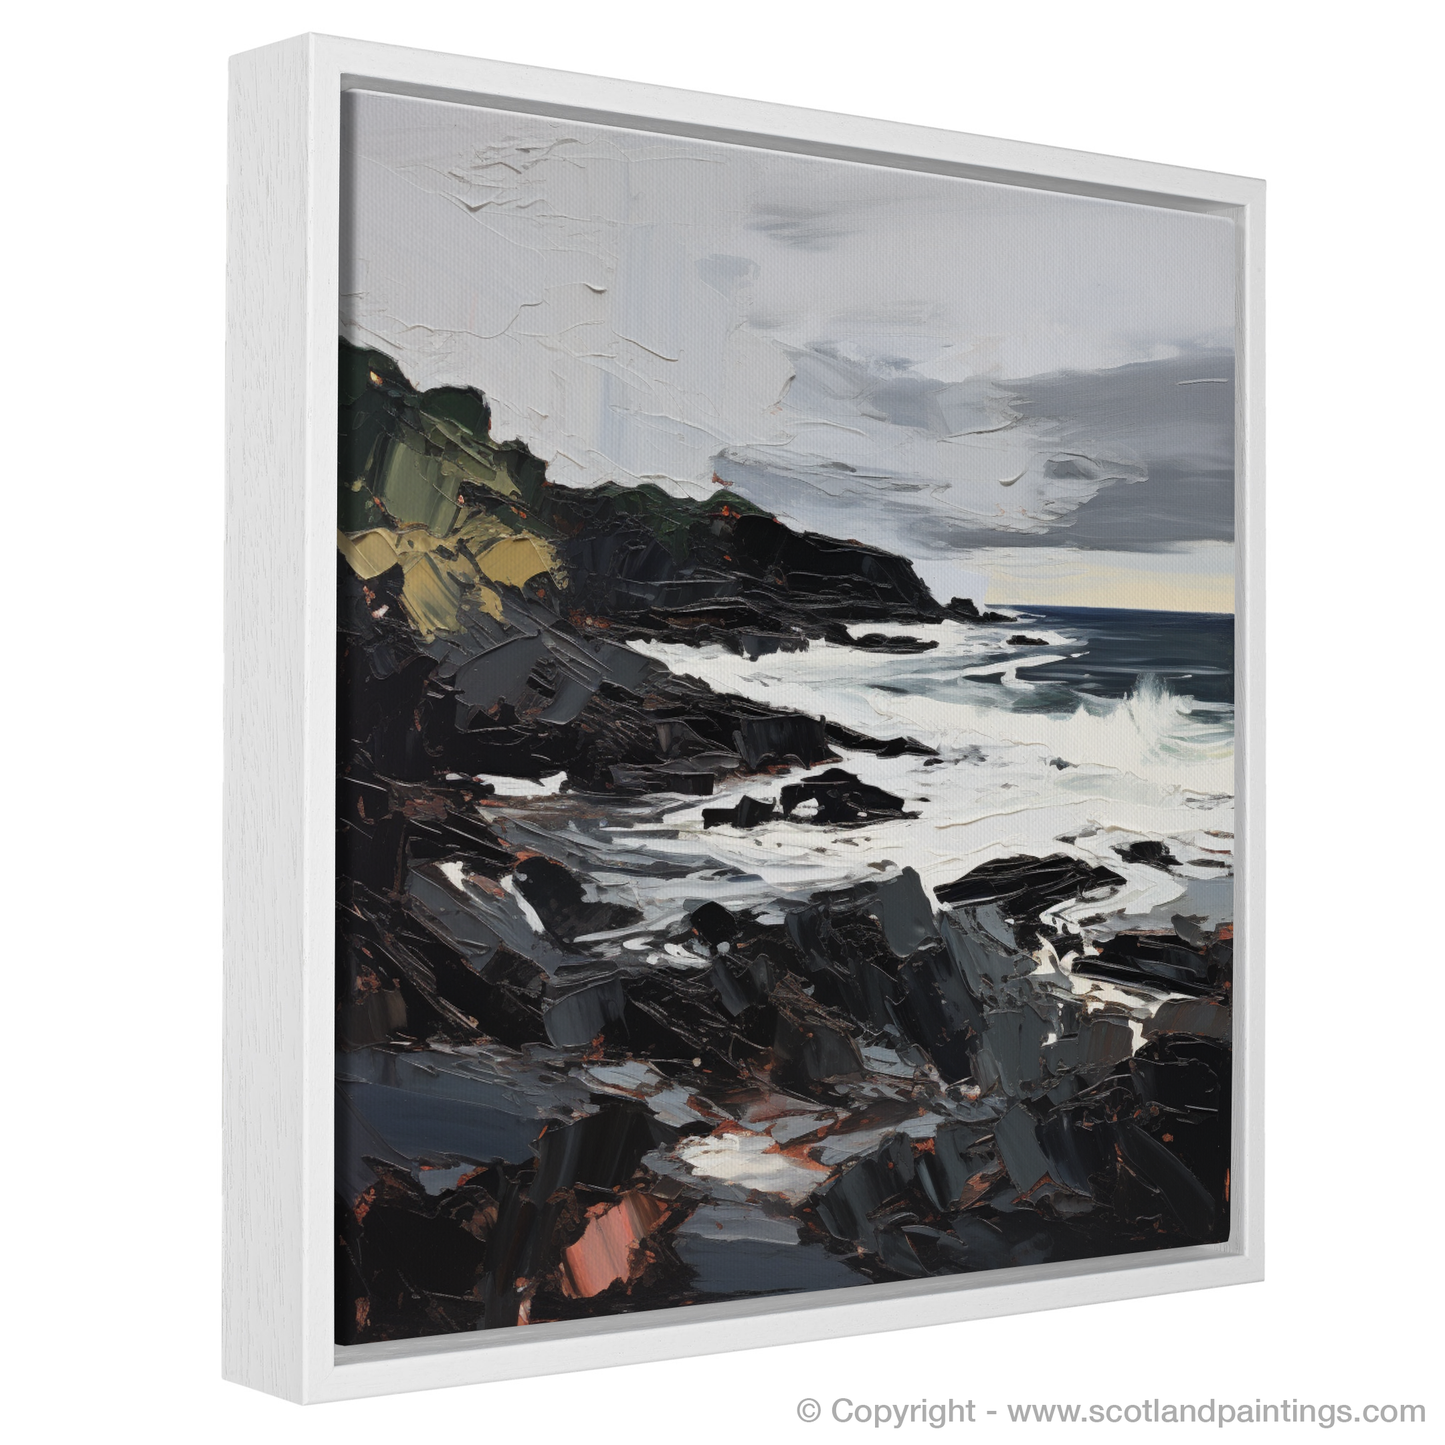 Painting and Art Print of Coldingham Bay with a stormy sky entitled "Stormy Essence of Coldingham Bay".